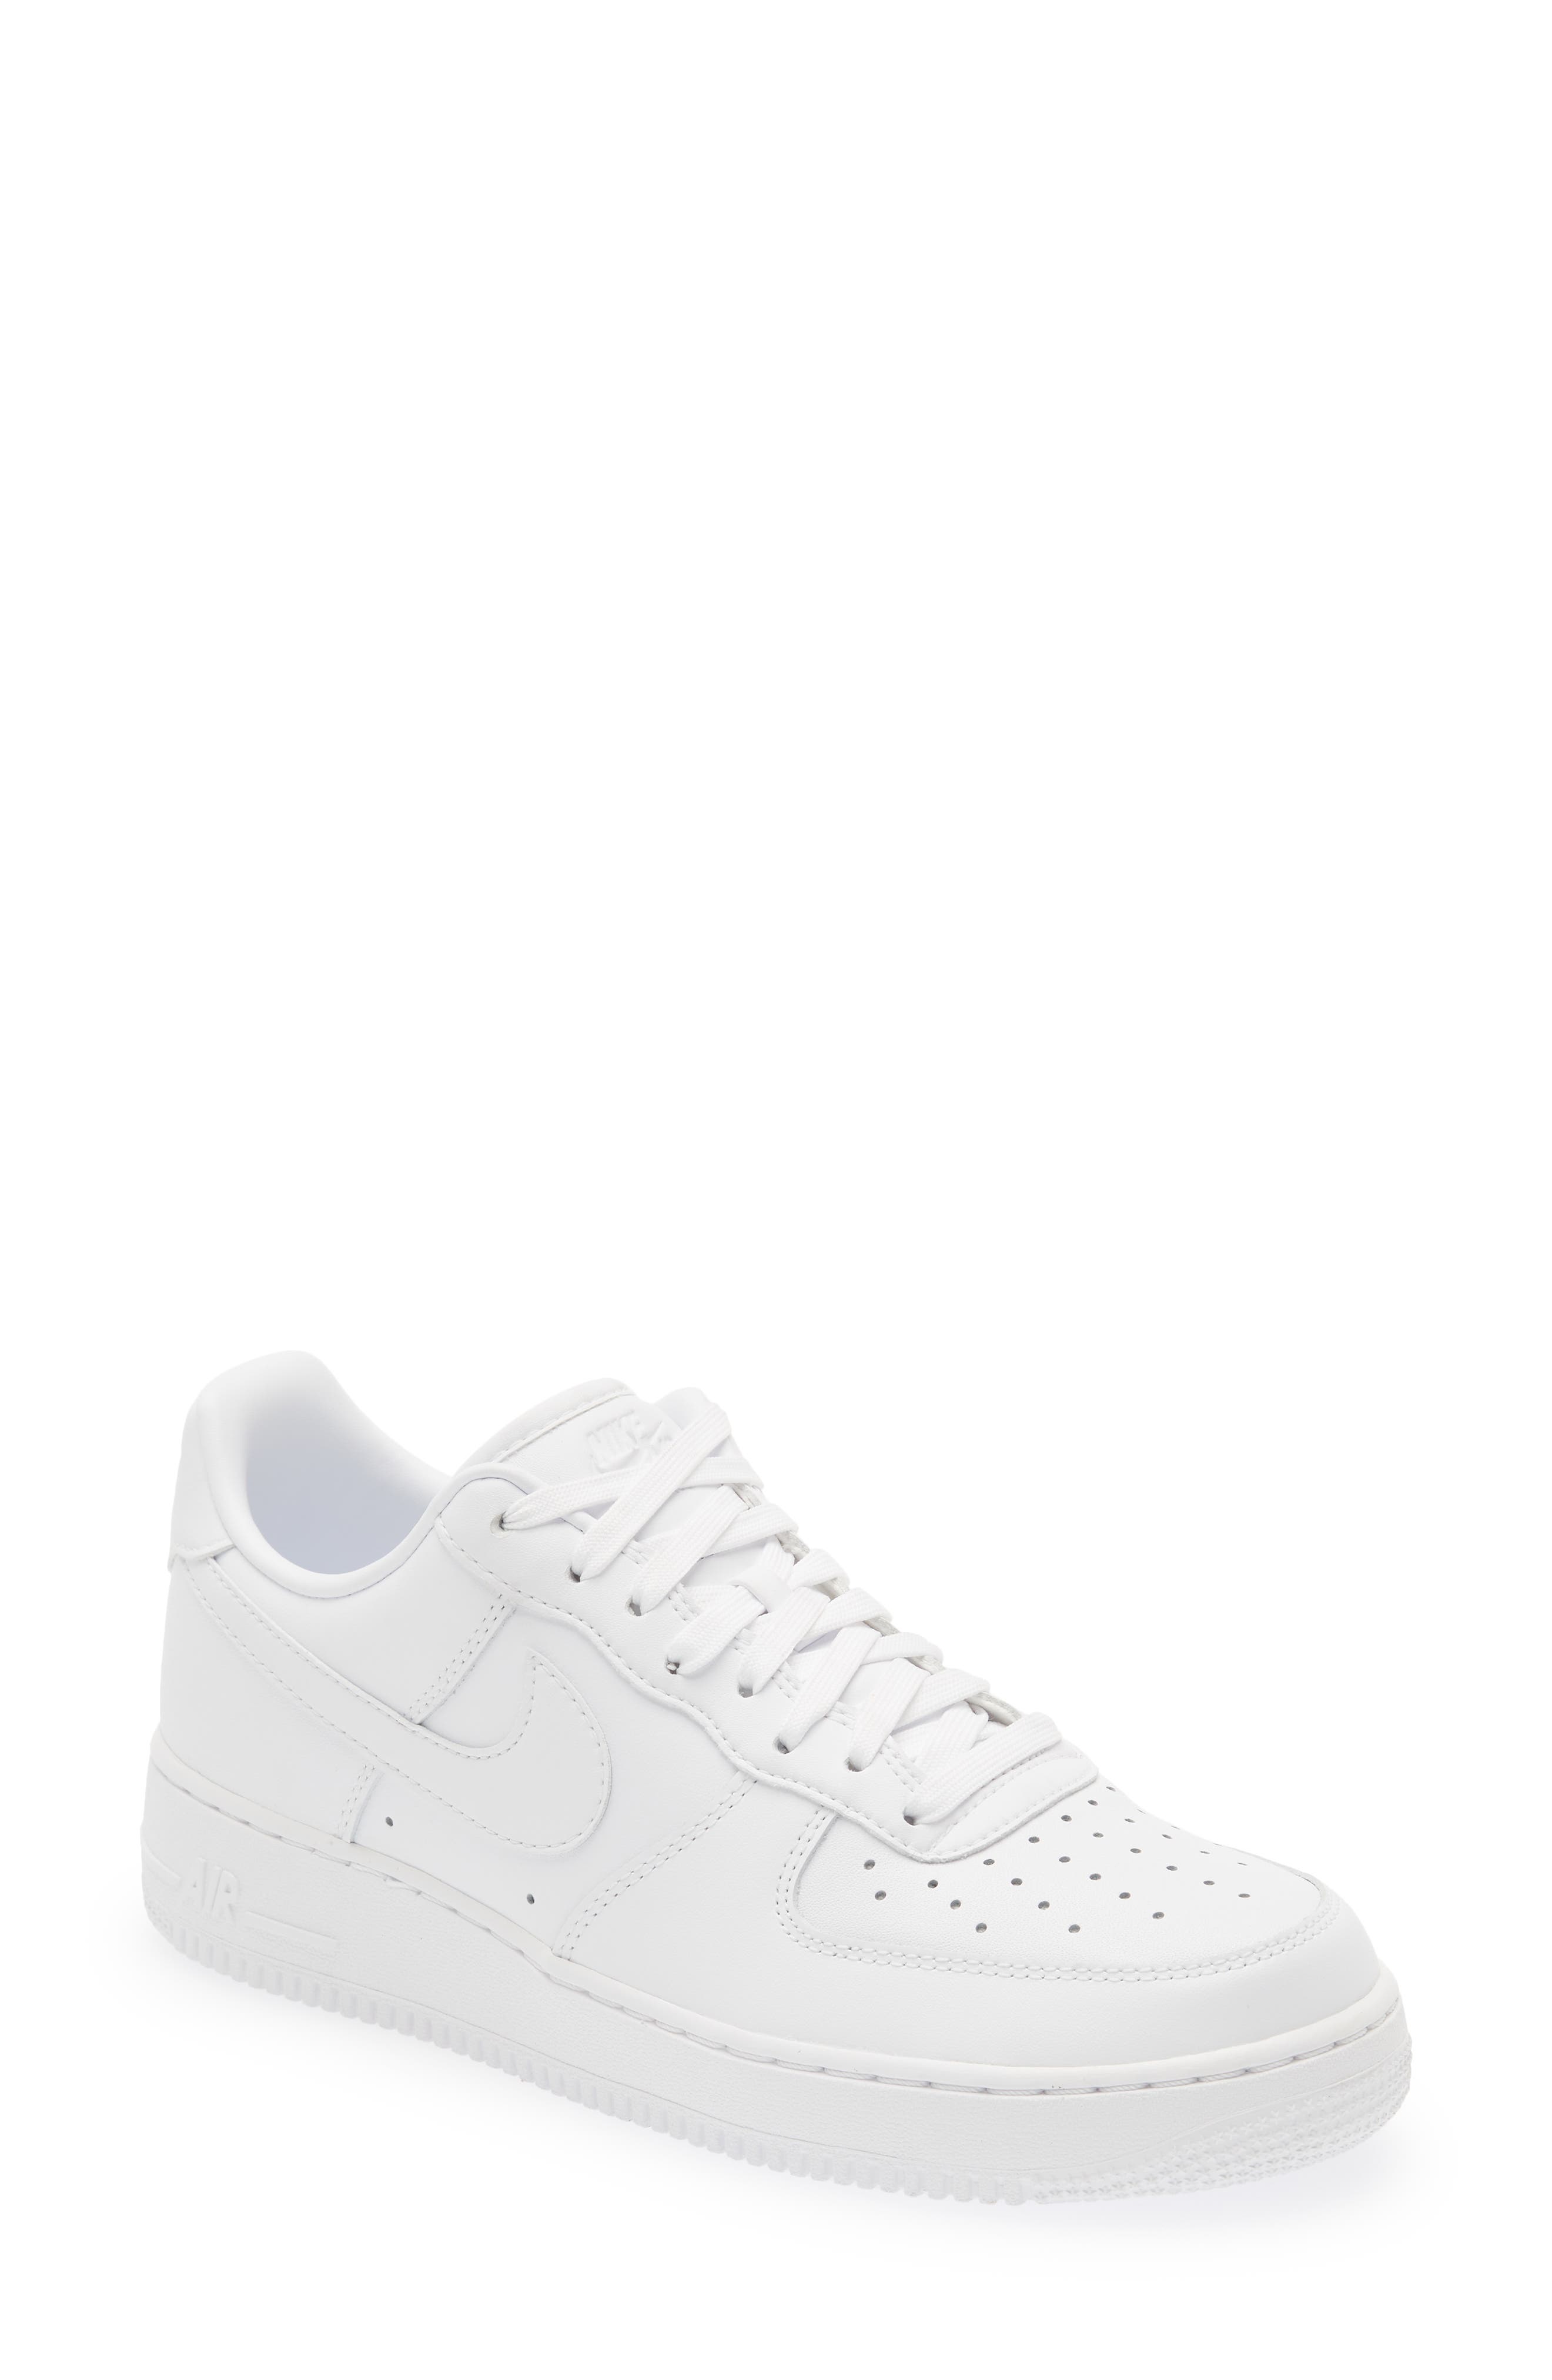 nordstrom nike air force 1 womens